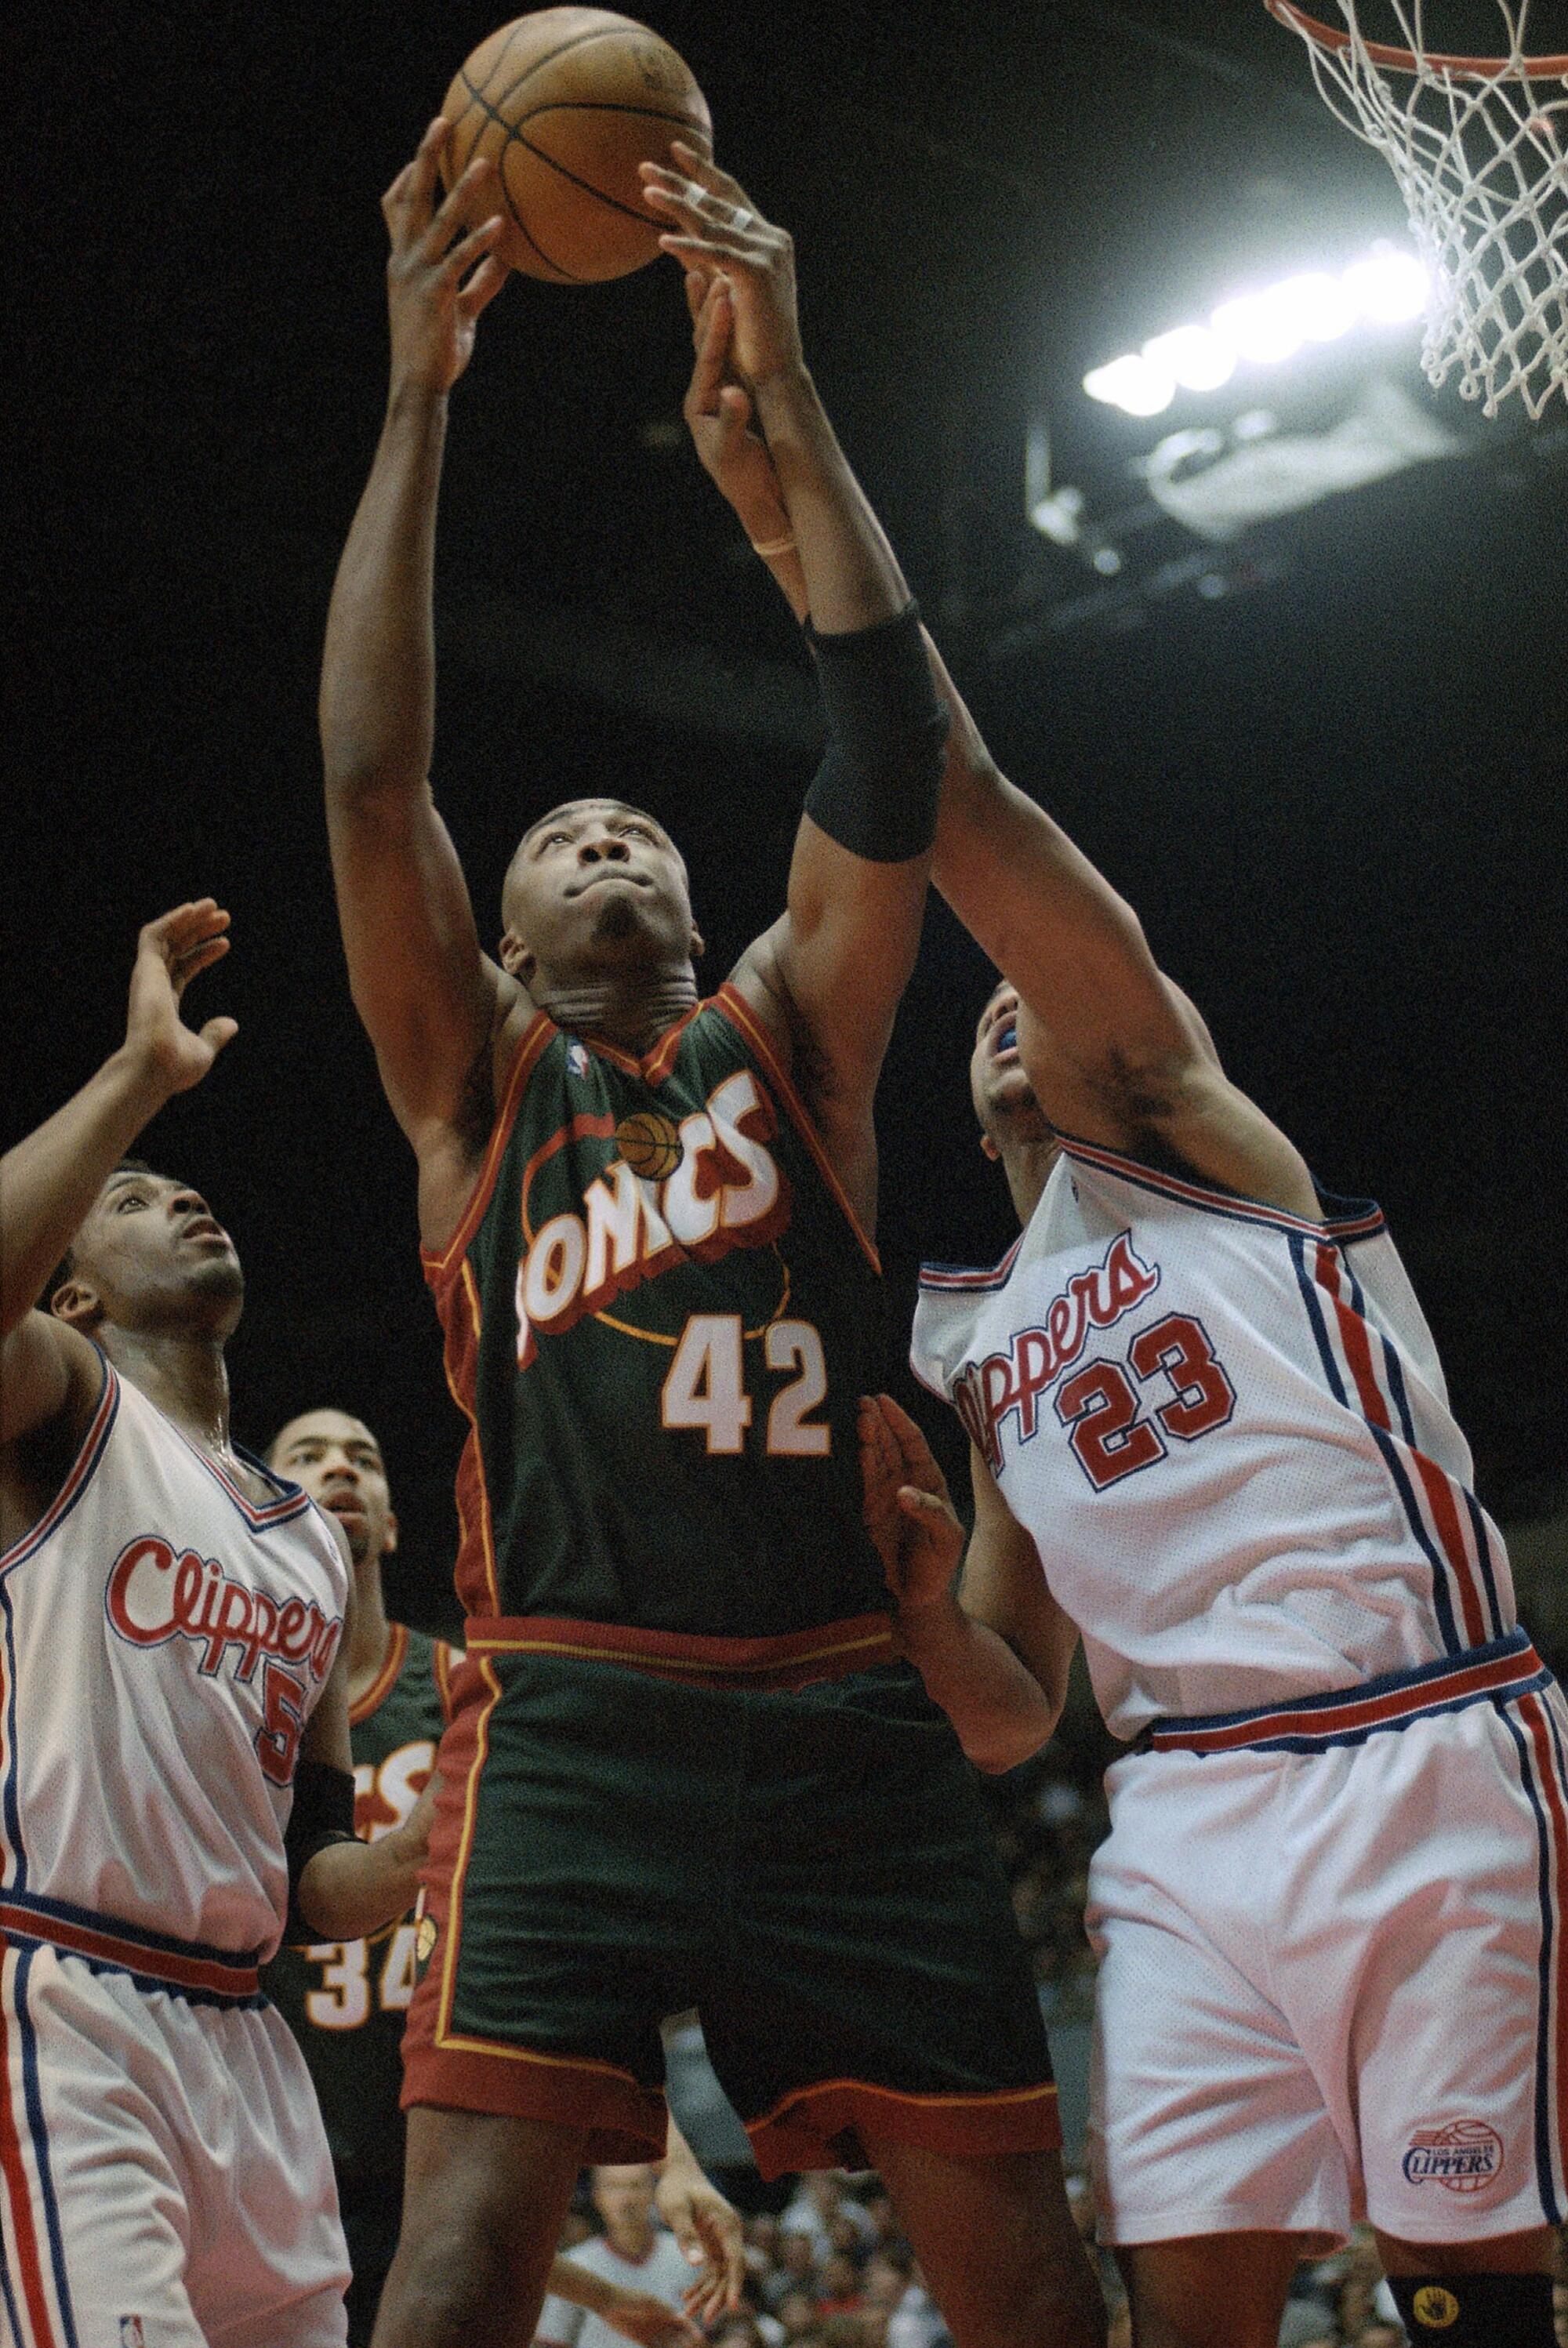 SuperSonics forward Vin Baker pulls down a rebound against the Clippers in 1999.